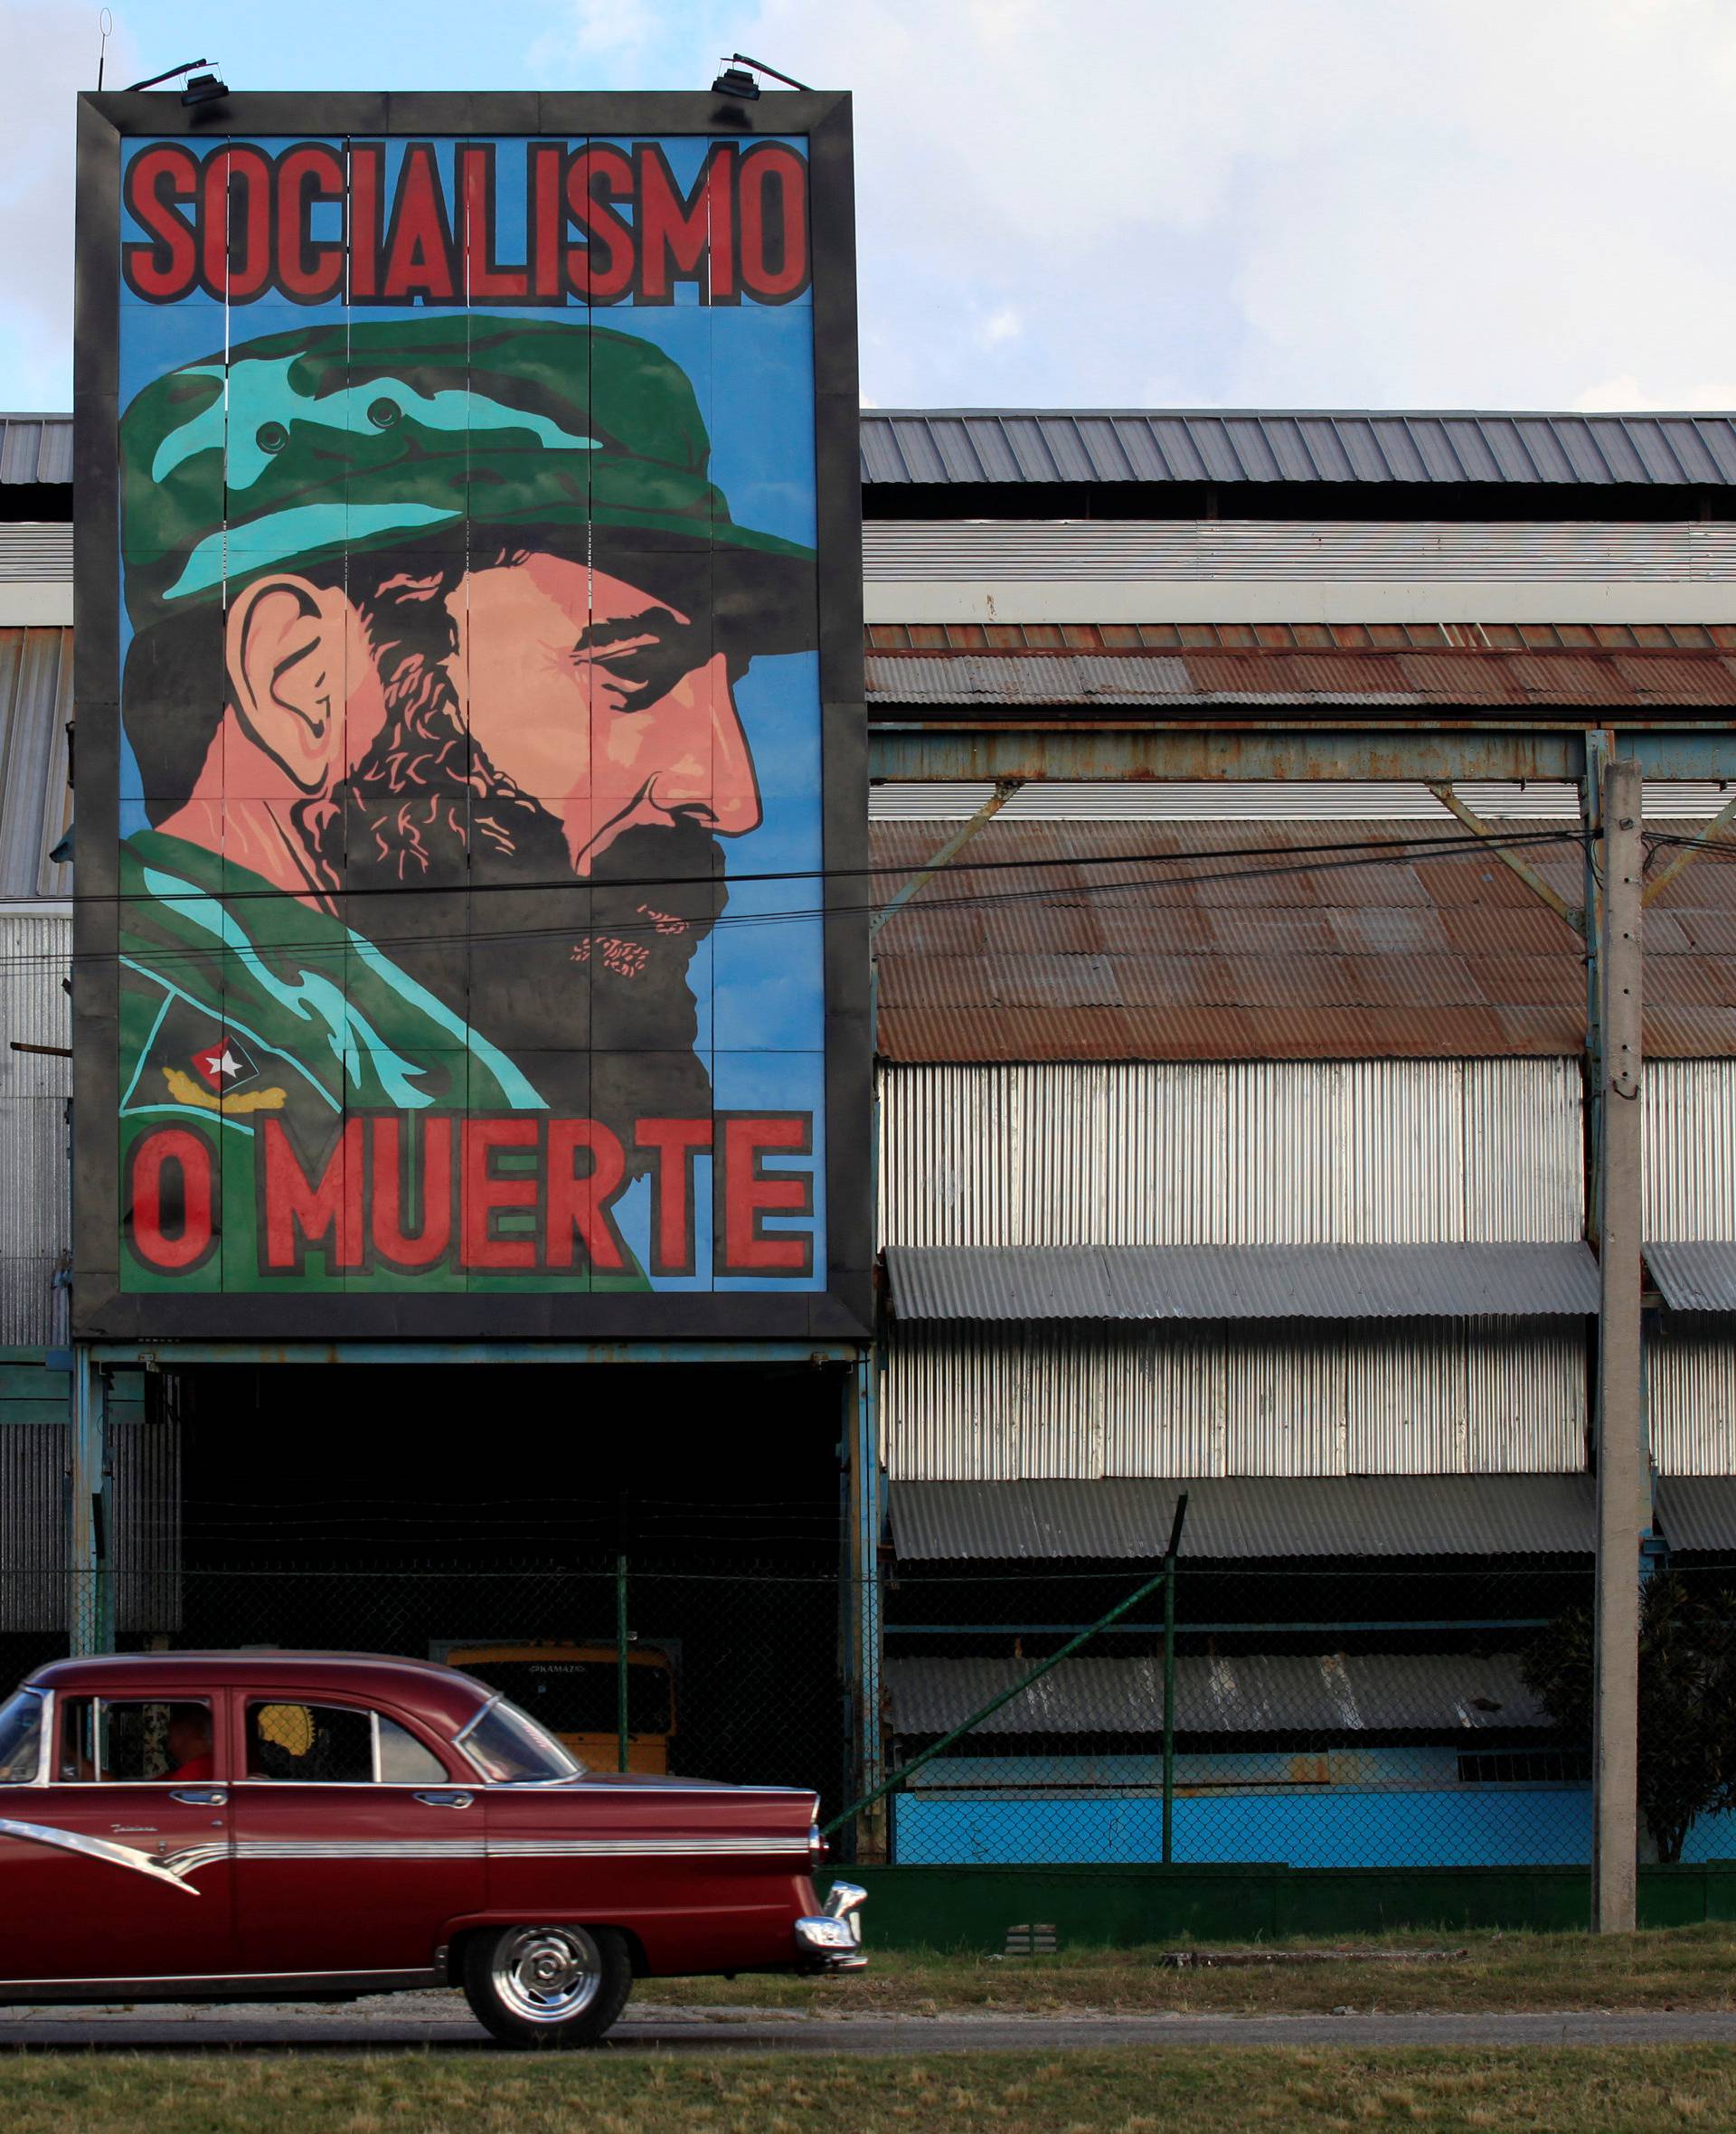 A painting of Cuba's former president Fidel Castro is seen at a factory in Havana, Cuba